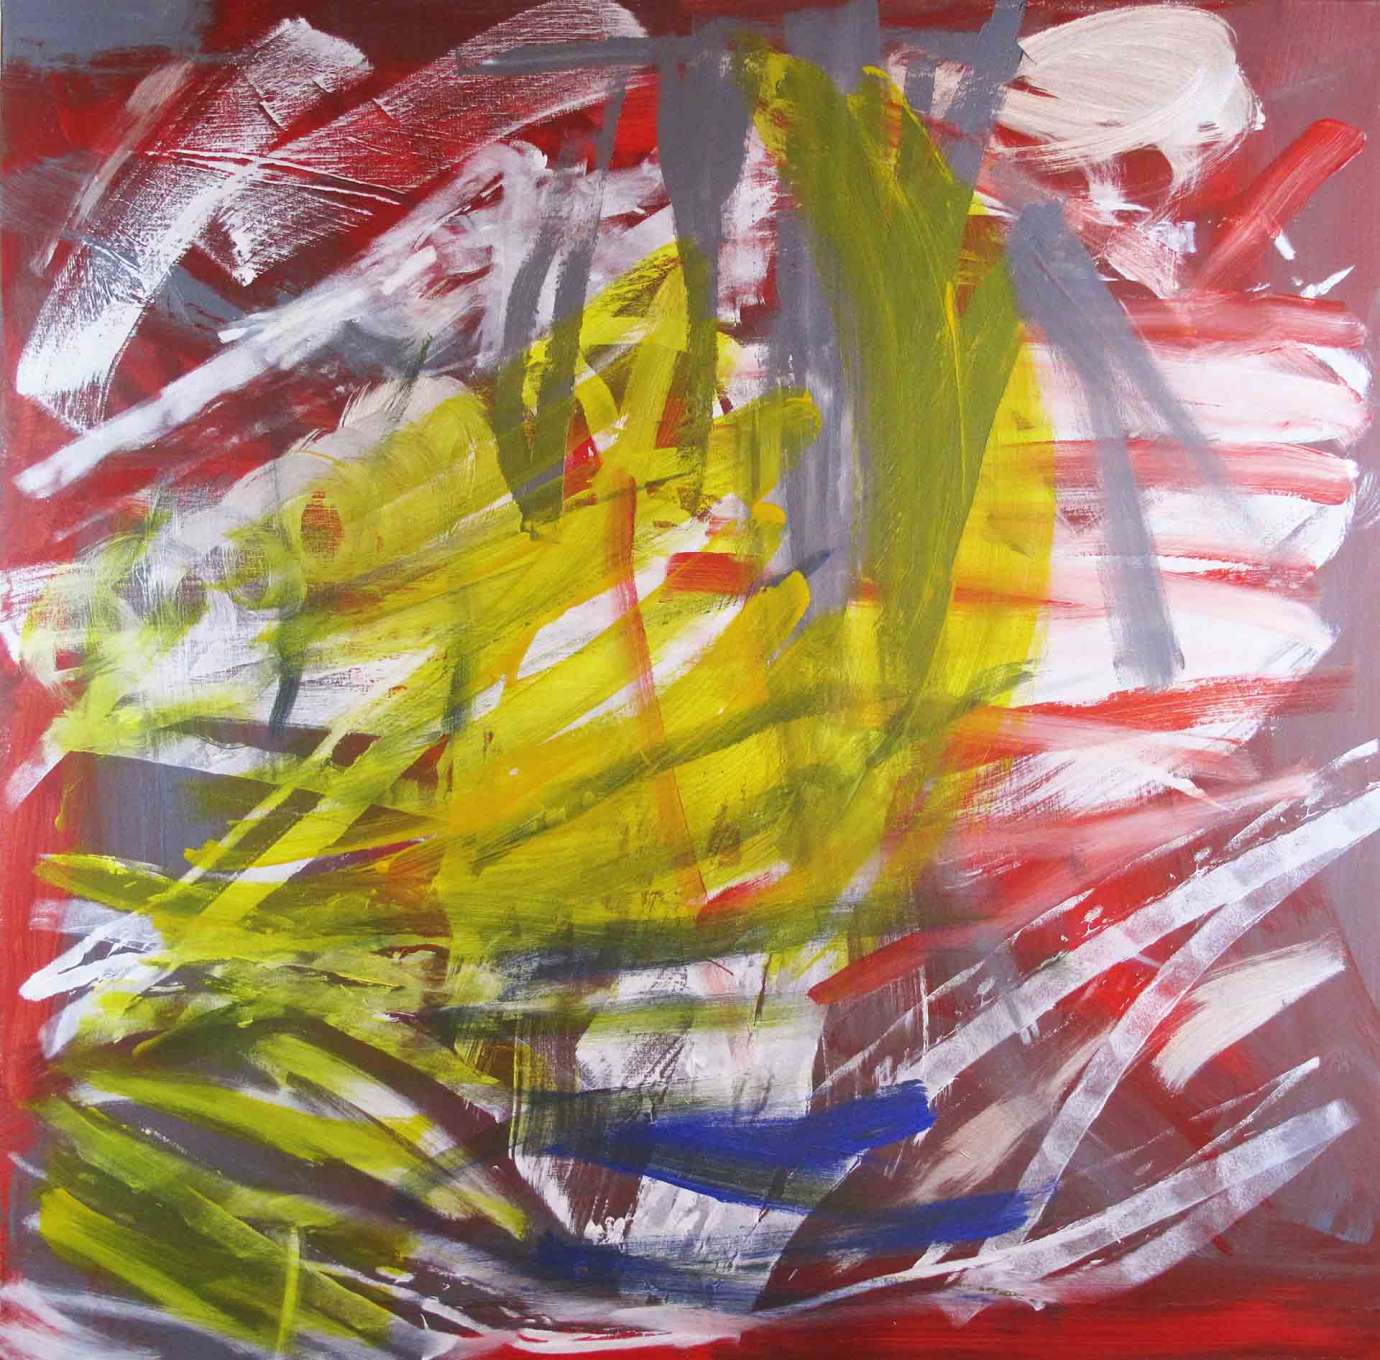 An abstract painting by Wiley Johnson featuring red, yellow, white and purple brush strokes